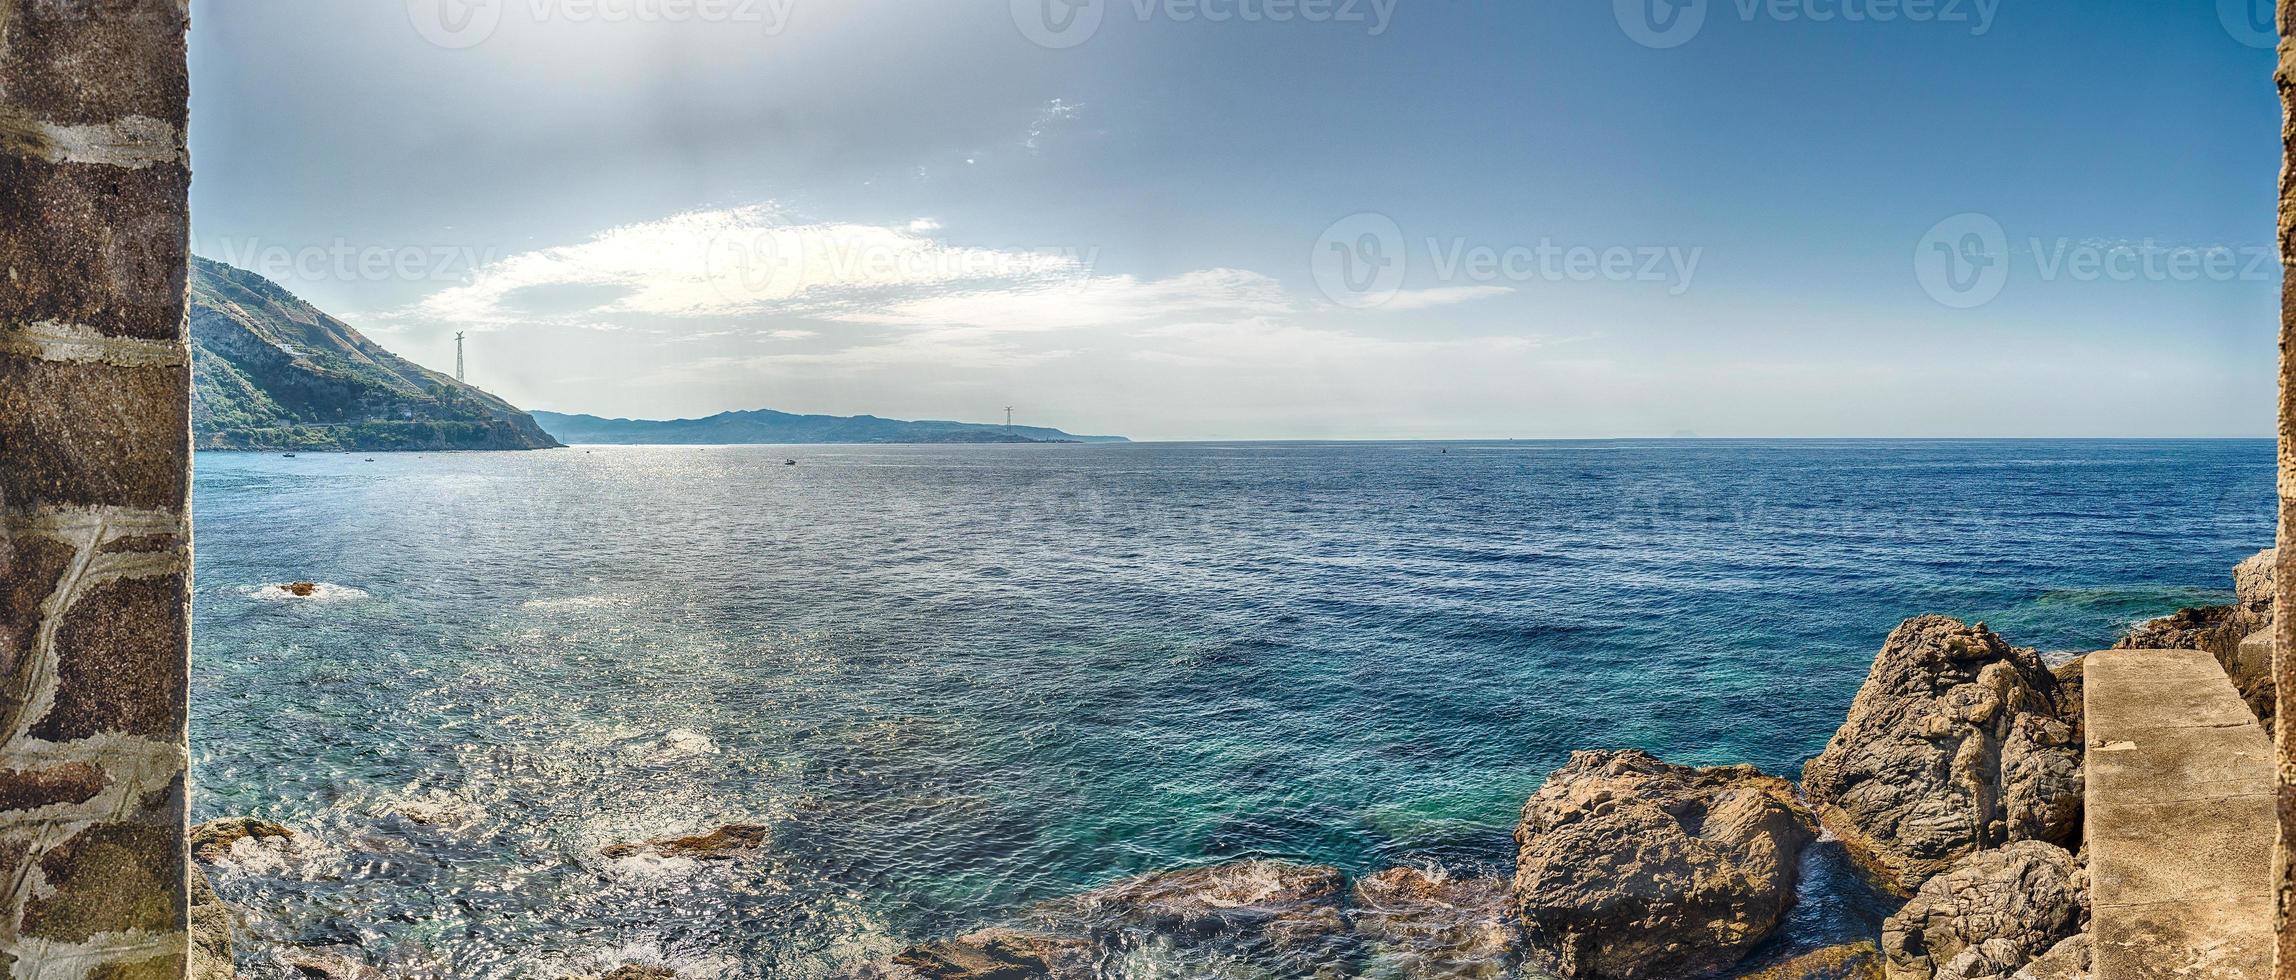 Panoramic view of the Strait of Messina, Italy photo